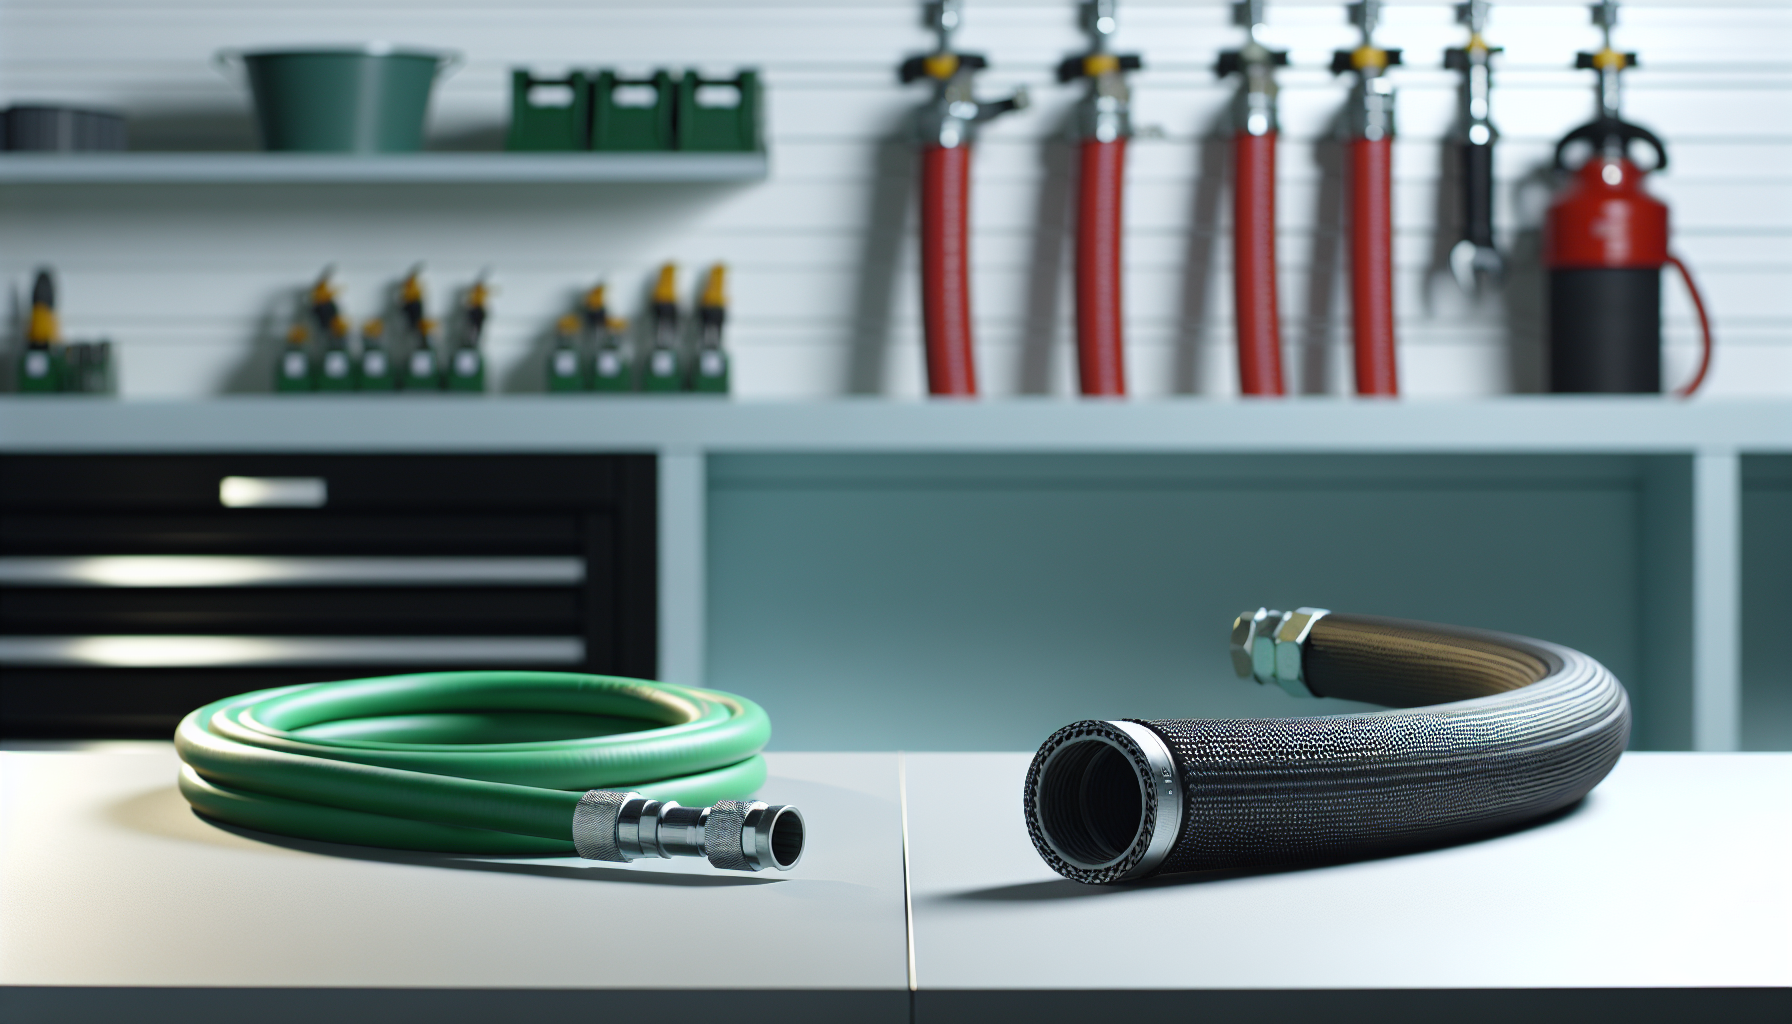 Comparison of lightweight and heavy-duty hoses